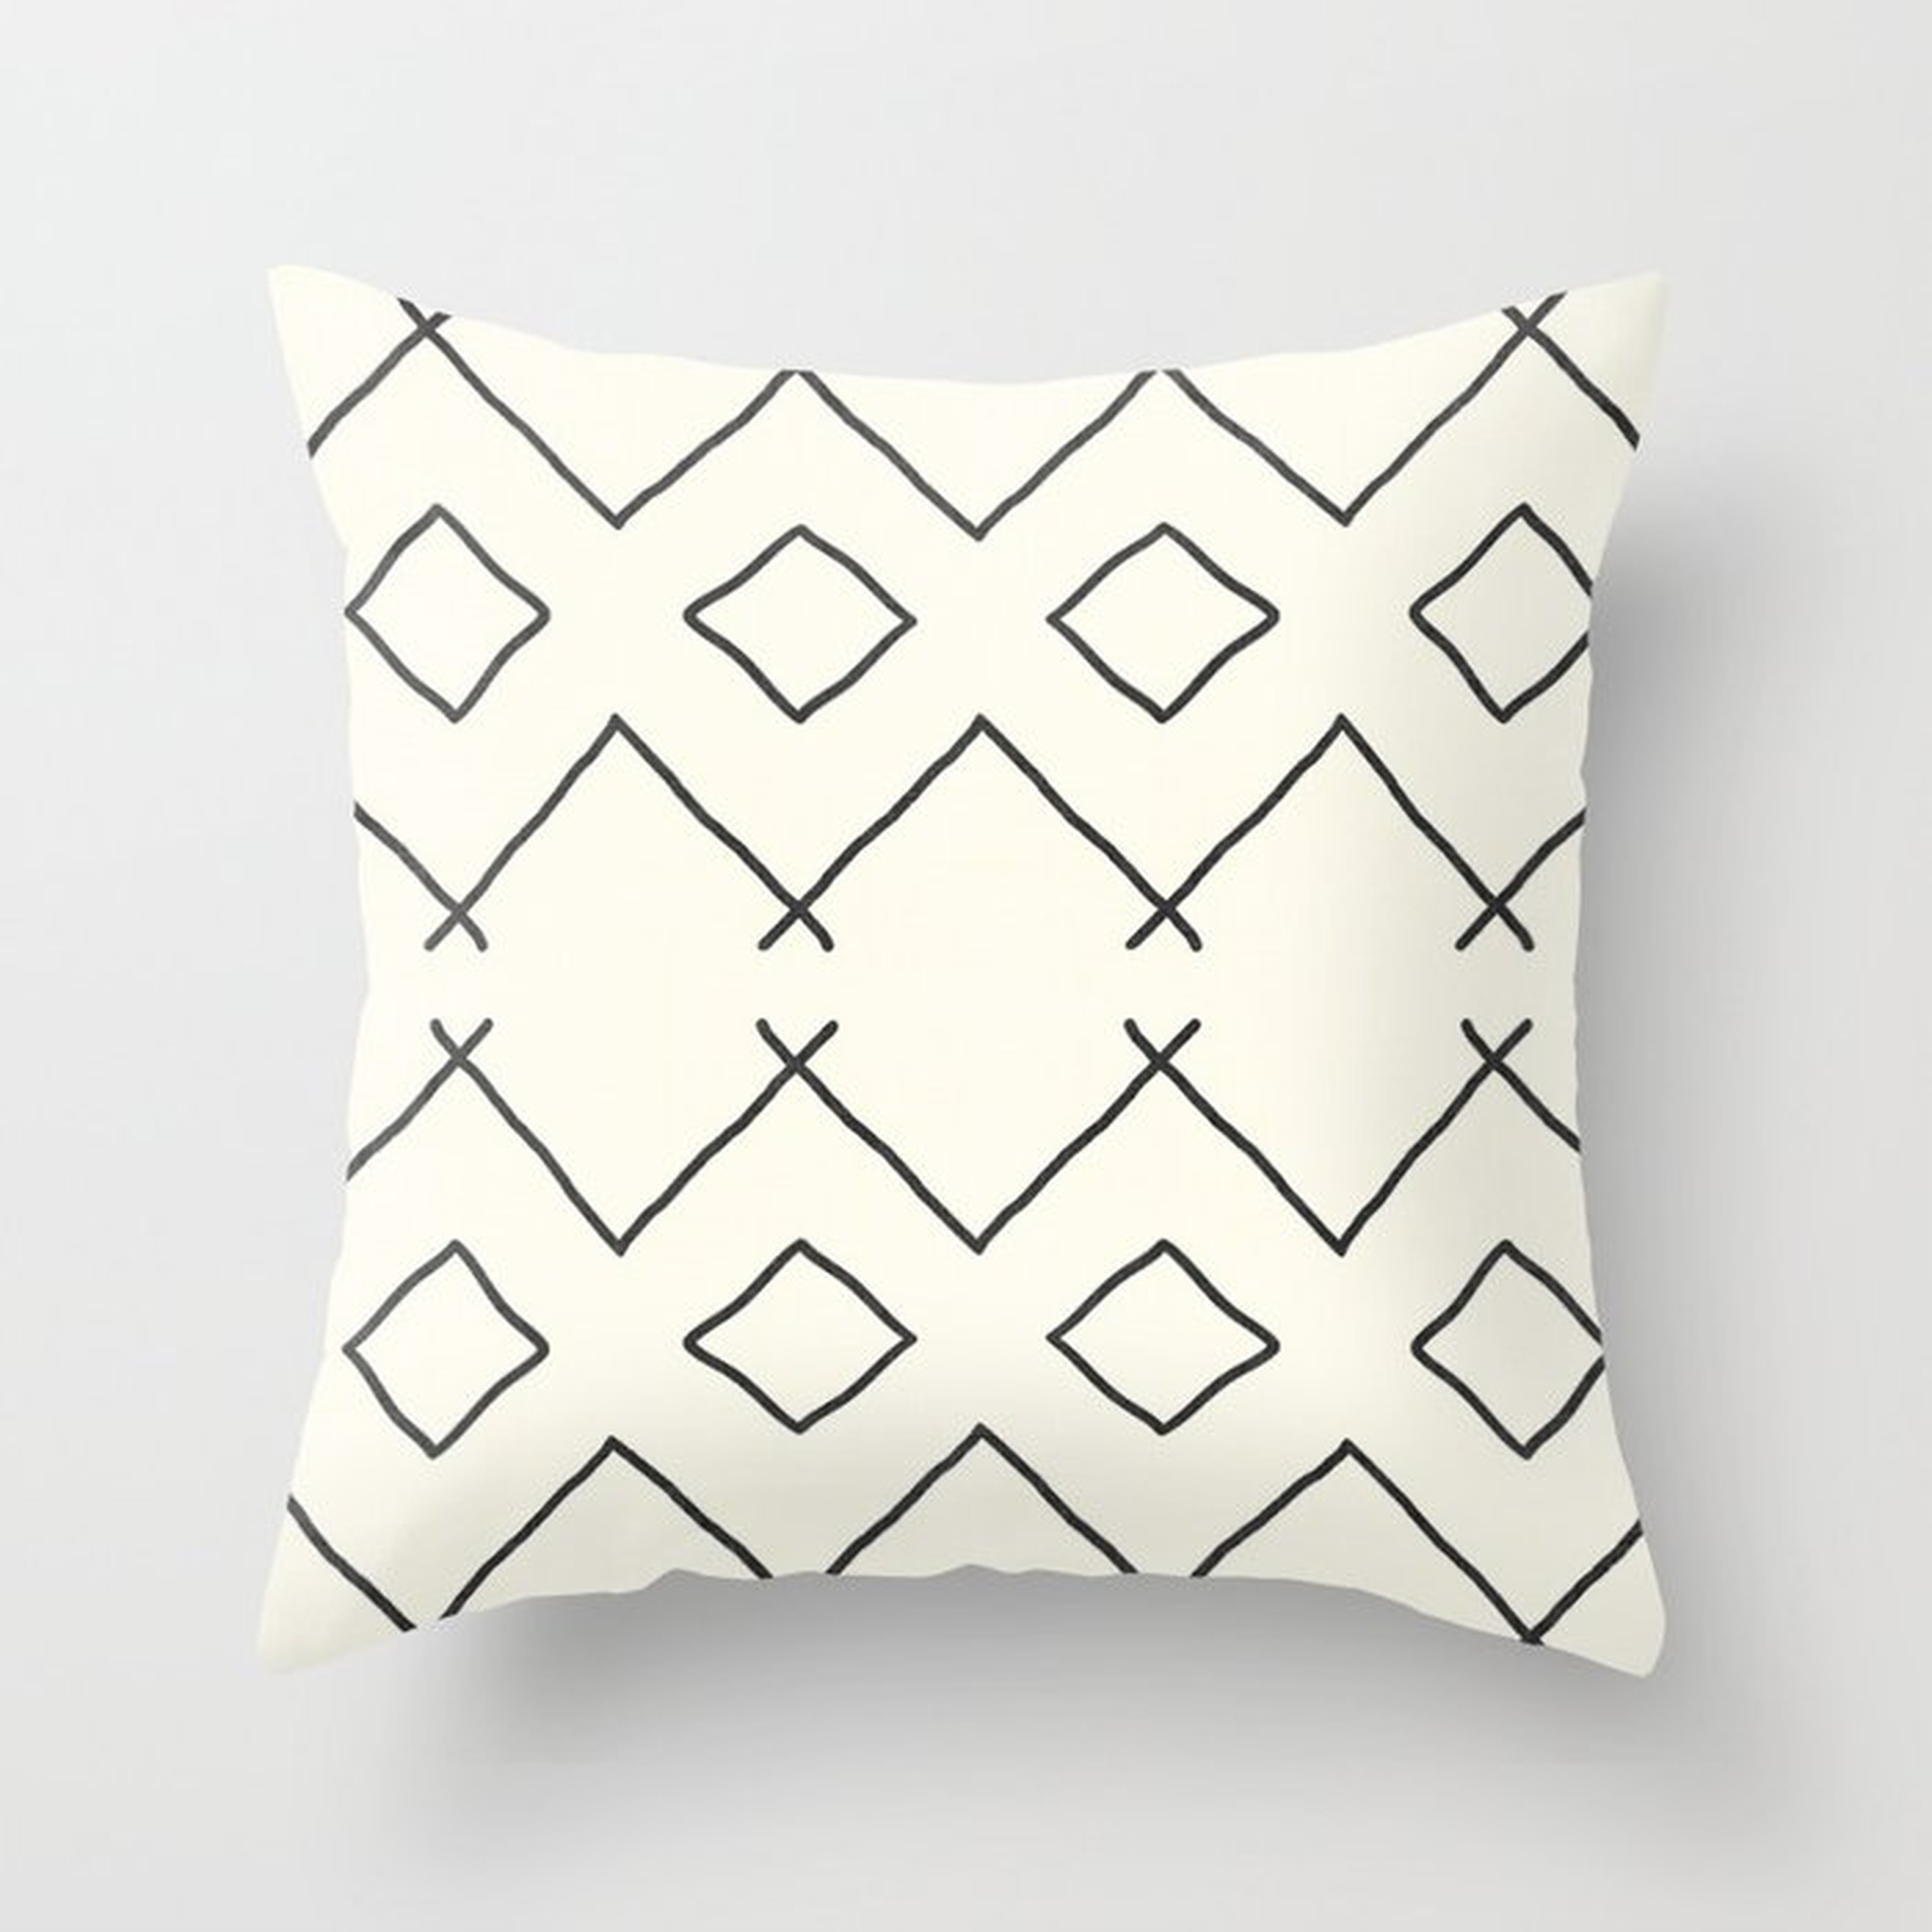 Bath In Cream Throw Pillow by House Of Haha - Cover (18" x 18") With Pillow Insert - Outdoor Pillow - Society6